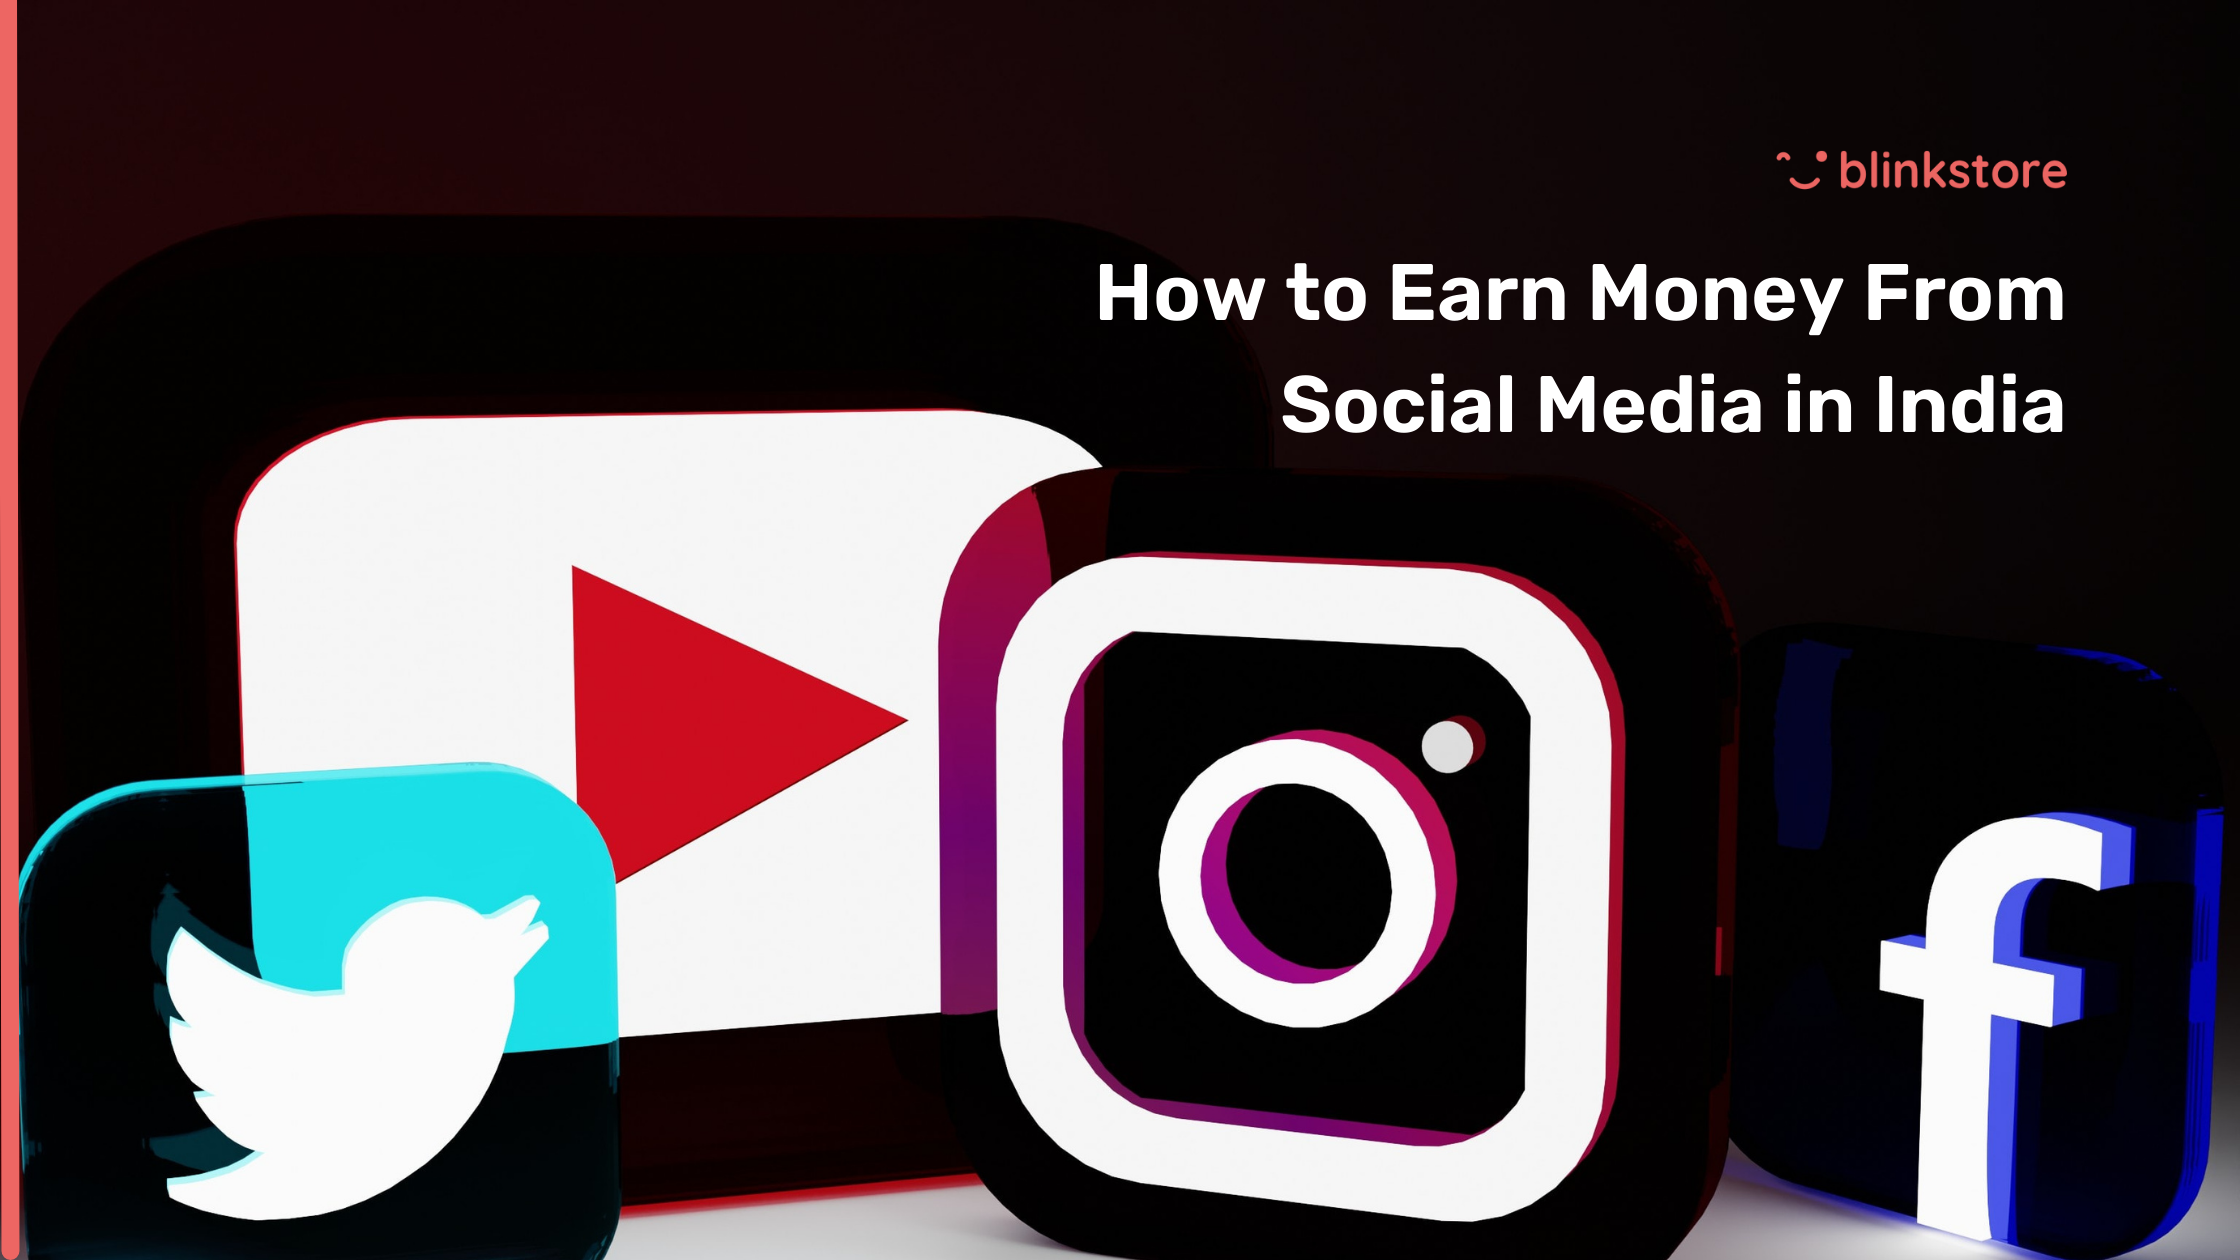 How To Earn Money From Social Media in India – 10 Best Ideas